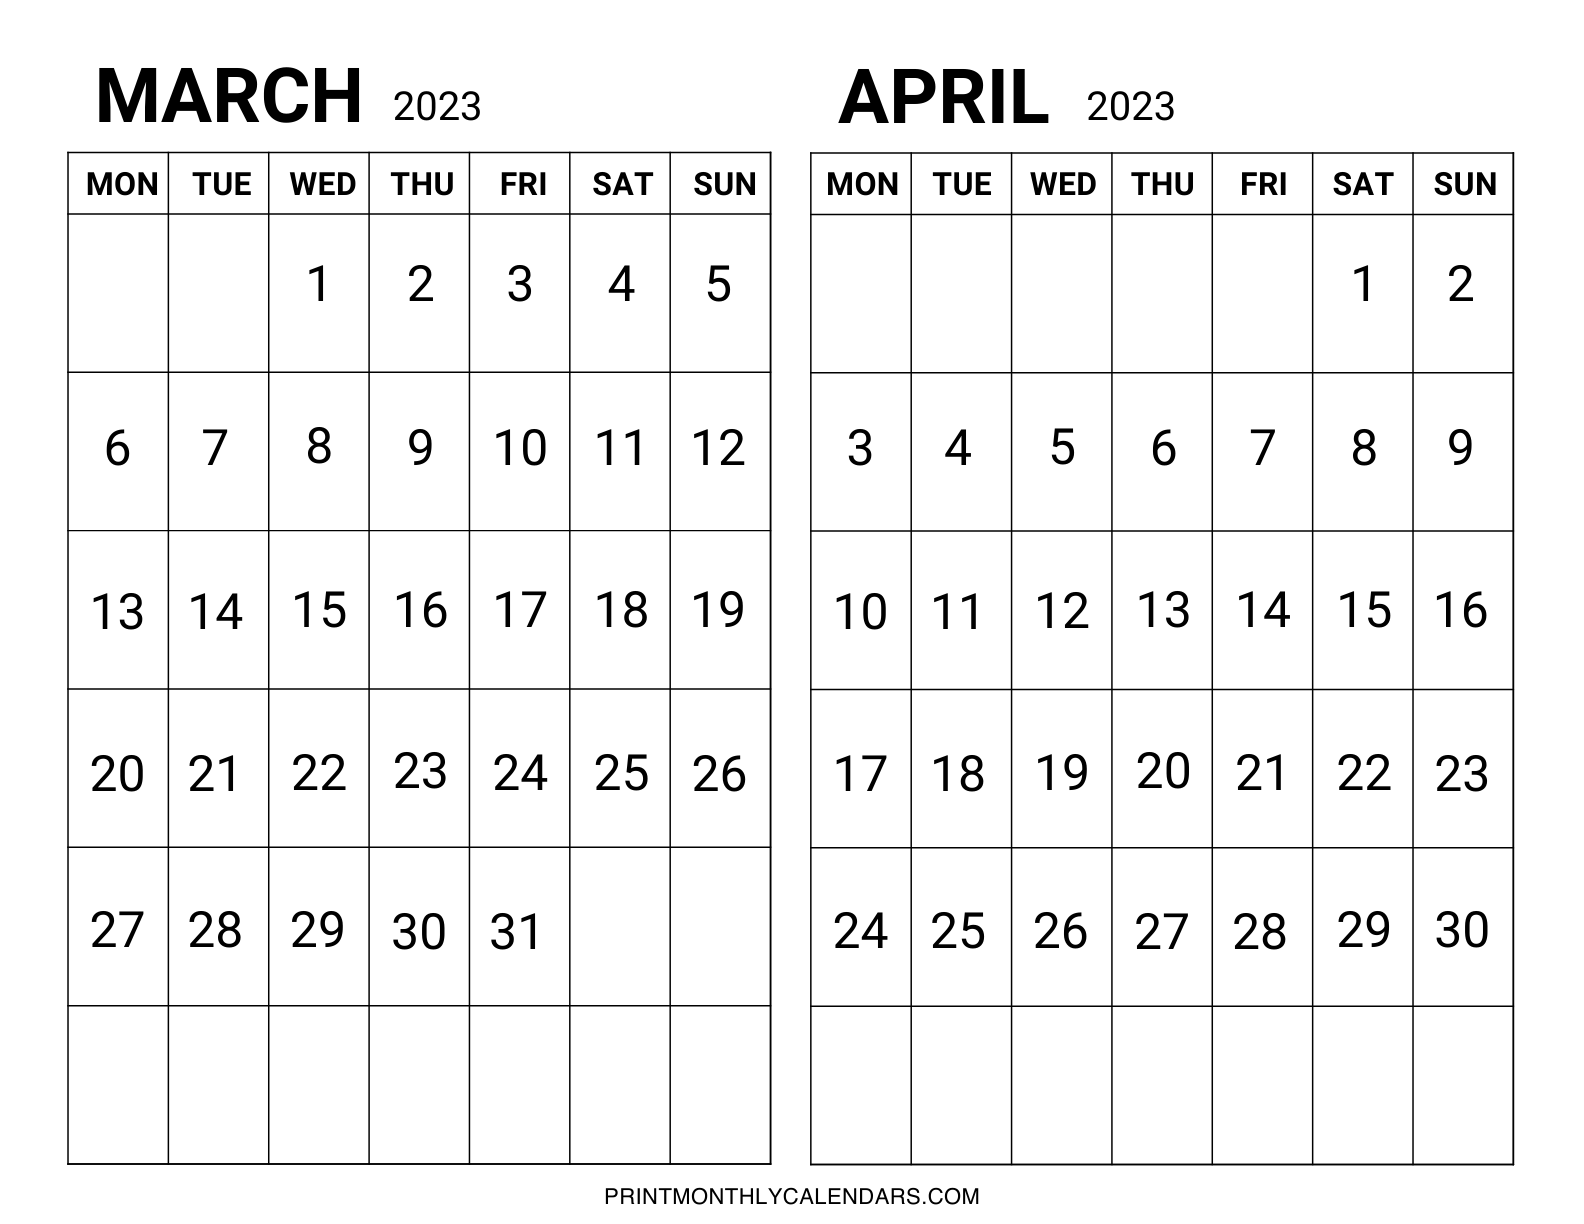 March April 2023 Calendar Monday Start template with bold monthly dates. Grids are arranged in landscape layout on one page planner template. Weekdays are starting from Monday instead of Sunday.